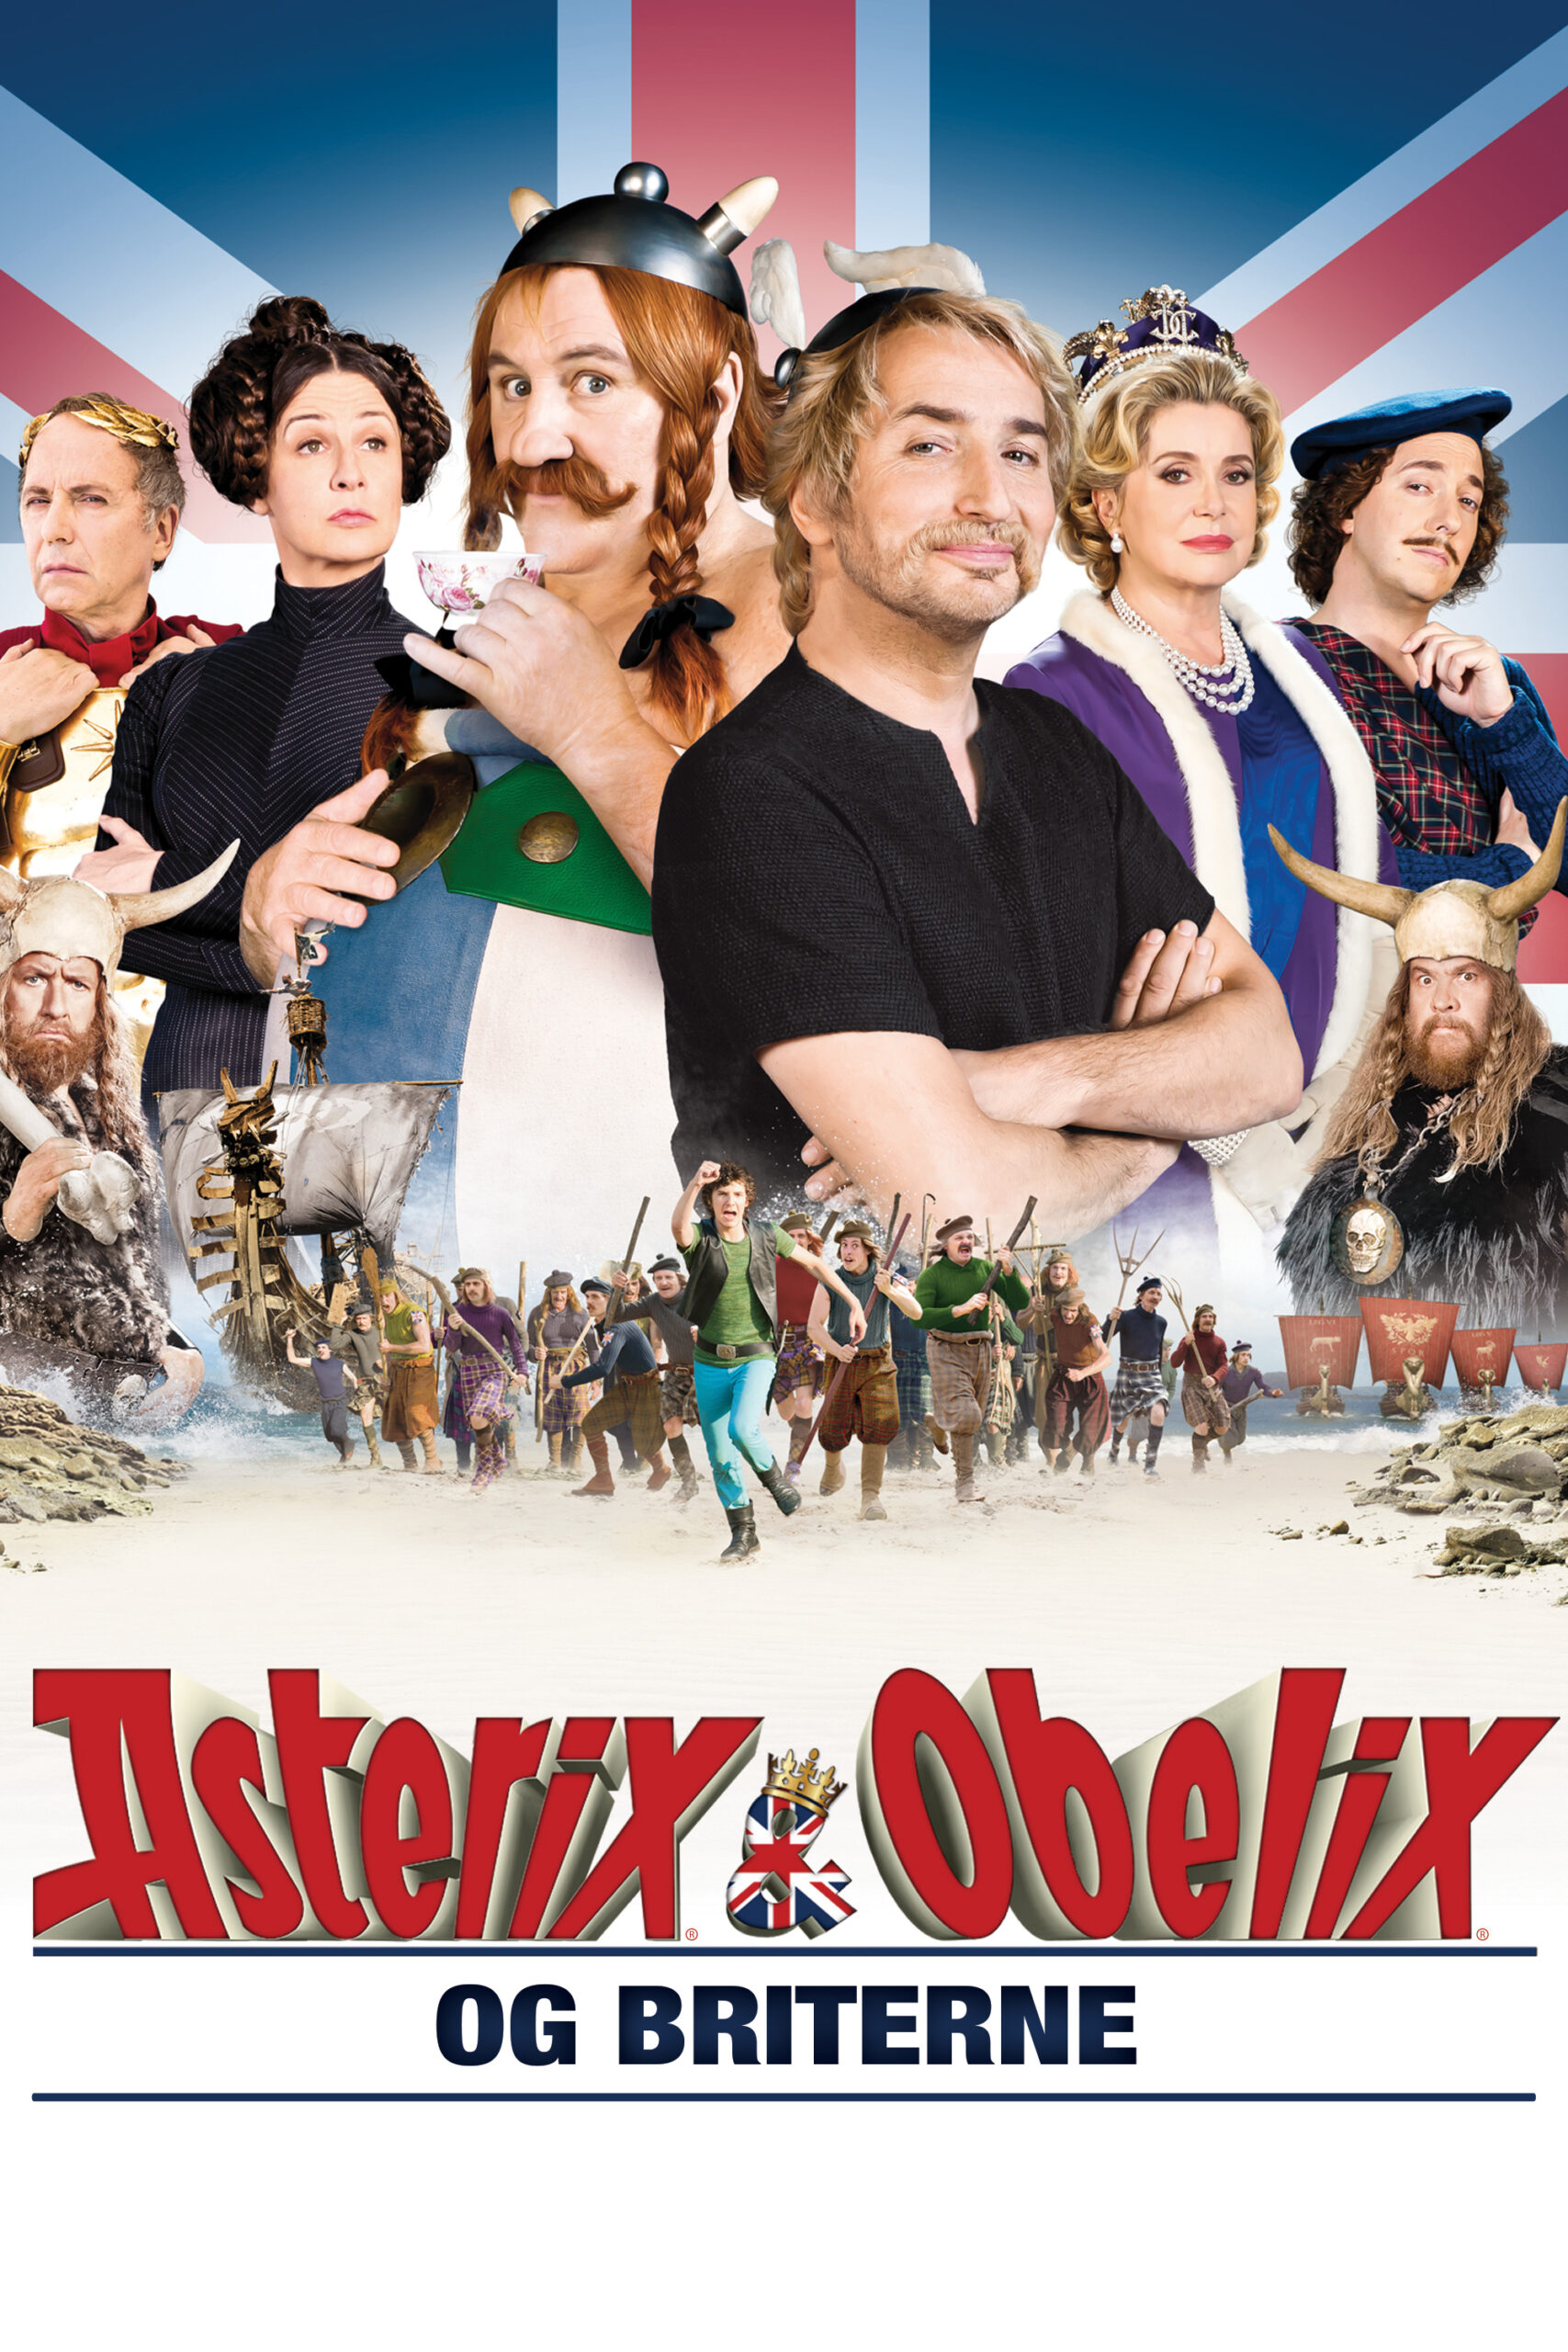 Read more about the article Asterix & Obelix og briterne